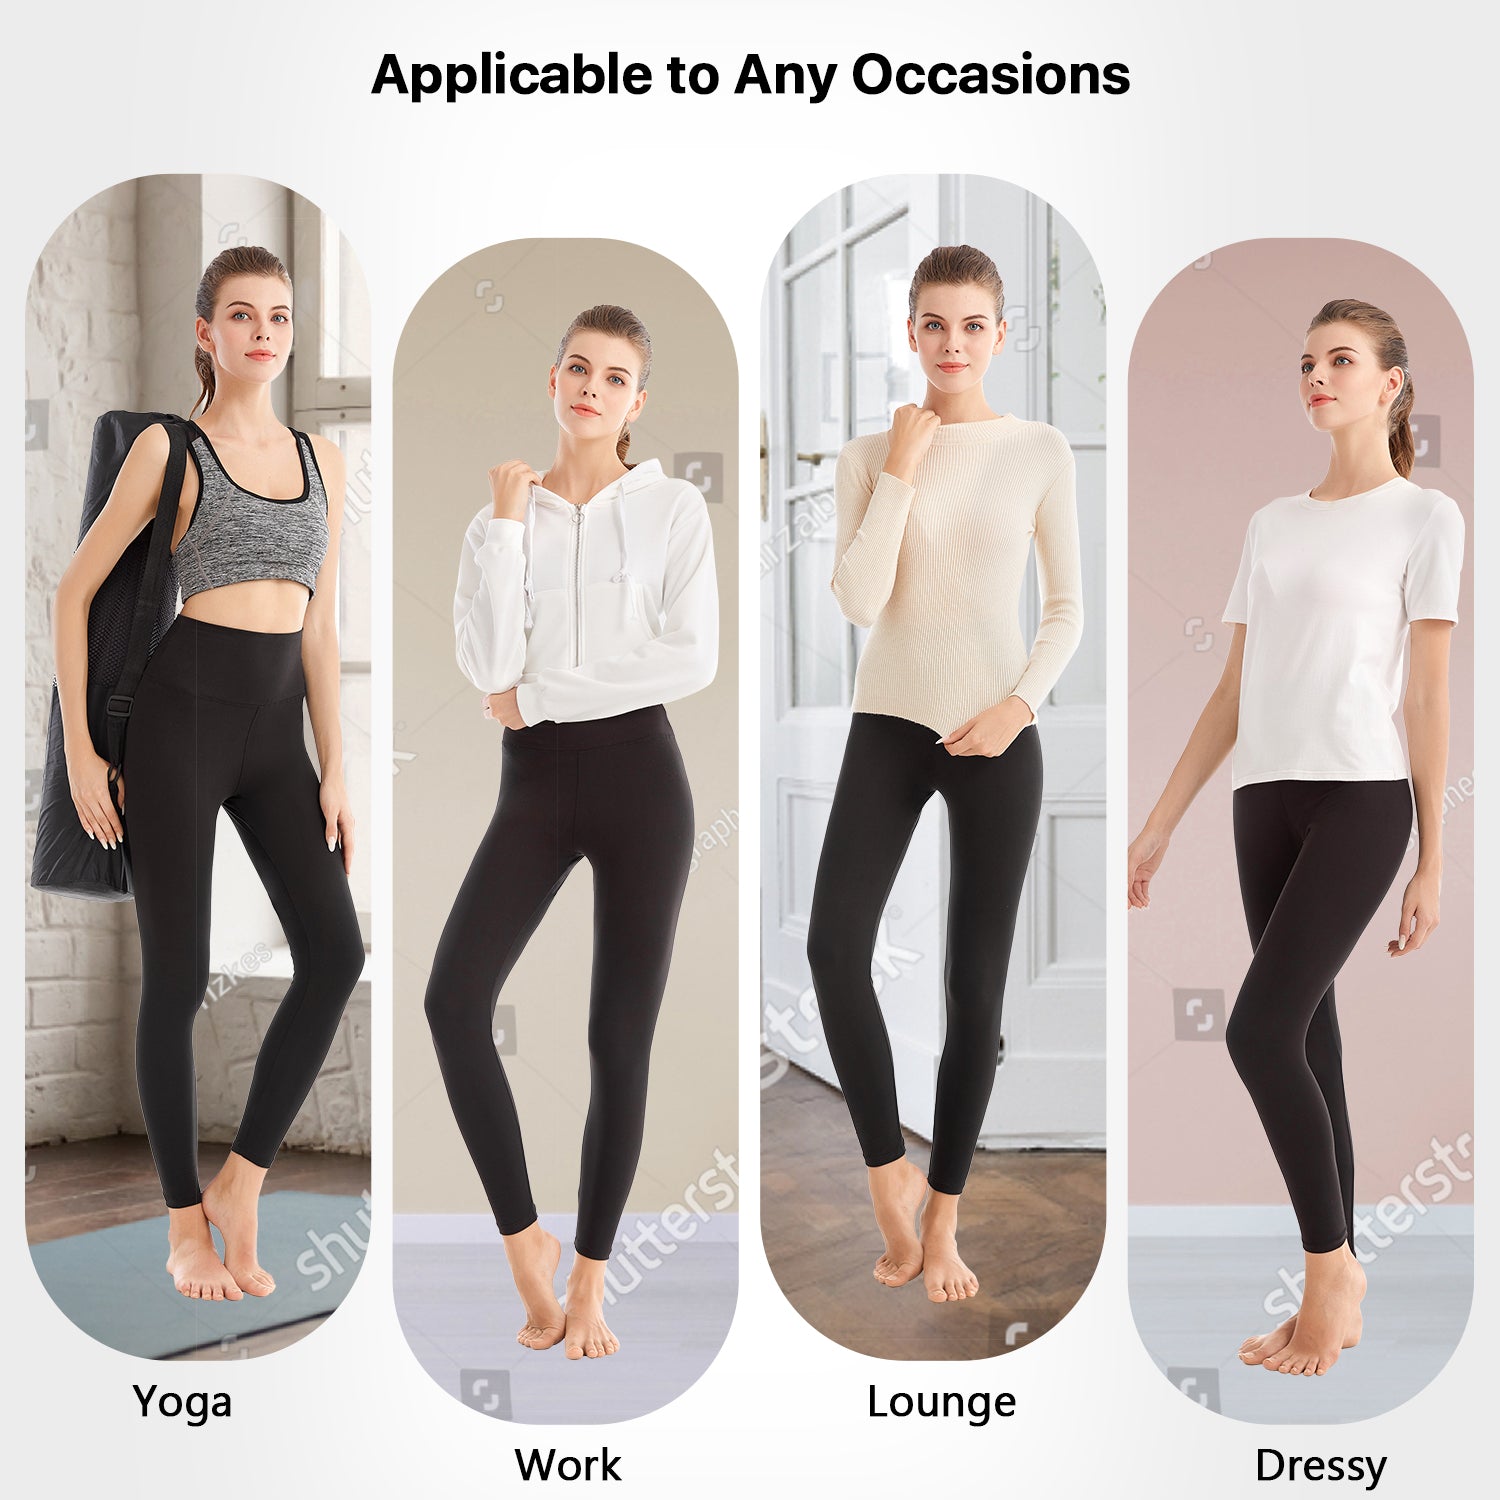 VALANDY High Waisted Leggings for Women Stretch Tummy Control Workout  Running Yoga Pants Reg&Plus Size, 5 Packs-black/Navy/Dark  Gray/Olive/Burgundy, Small-Medium : Buy Online at Best Price in KSA - Souq  is now 